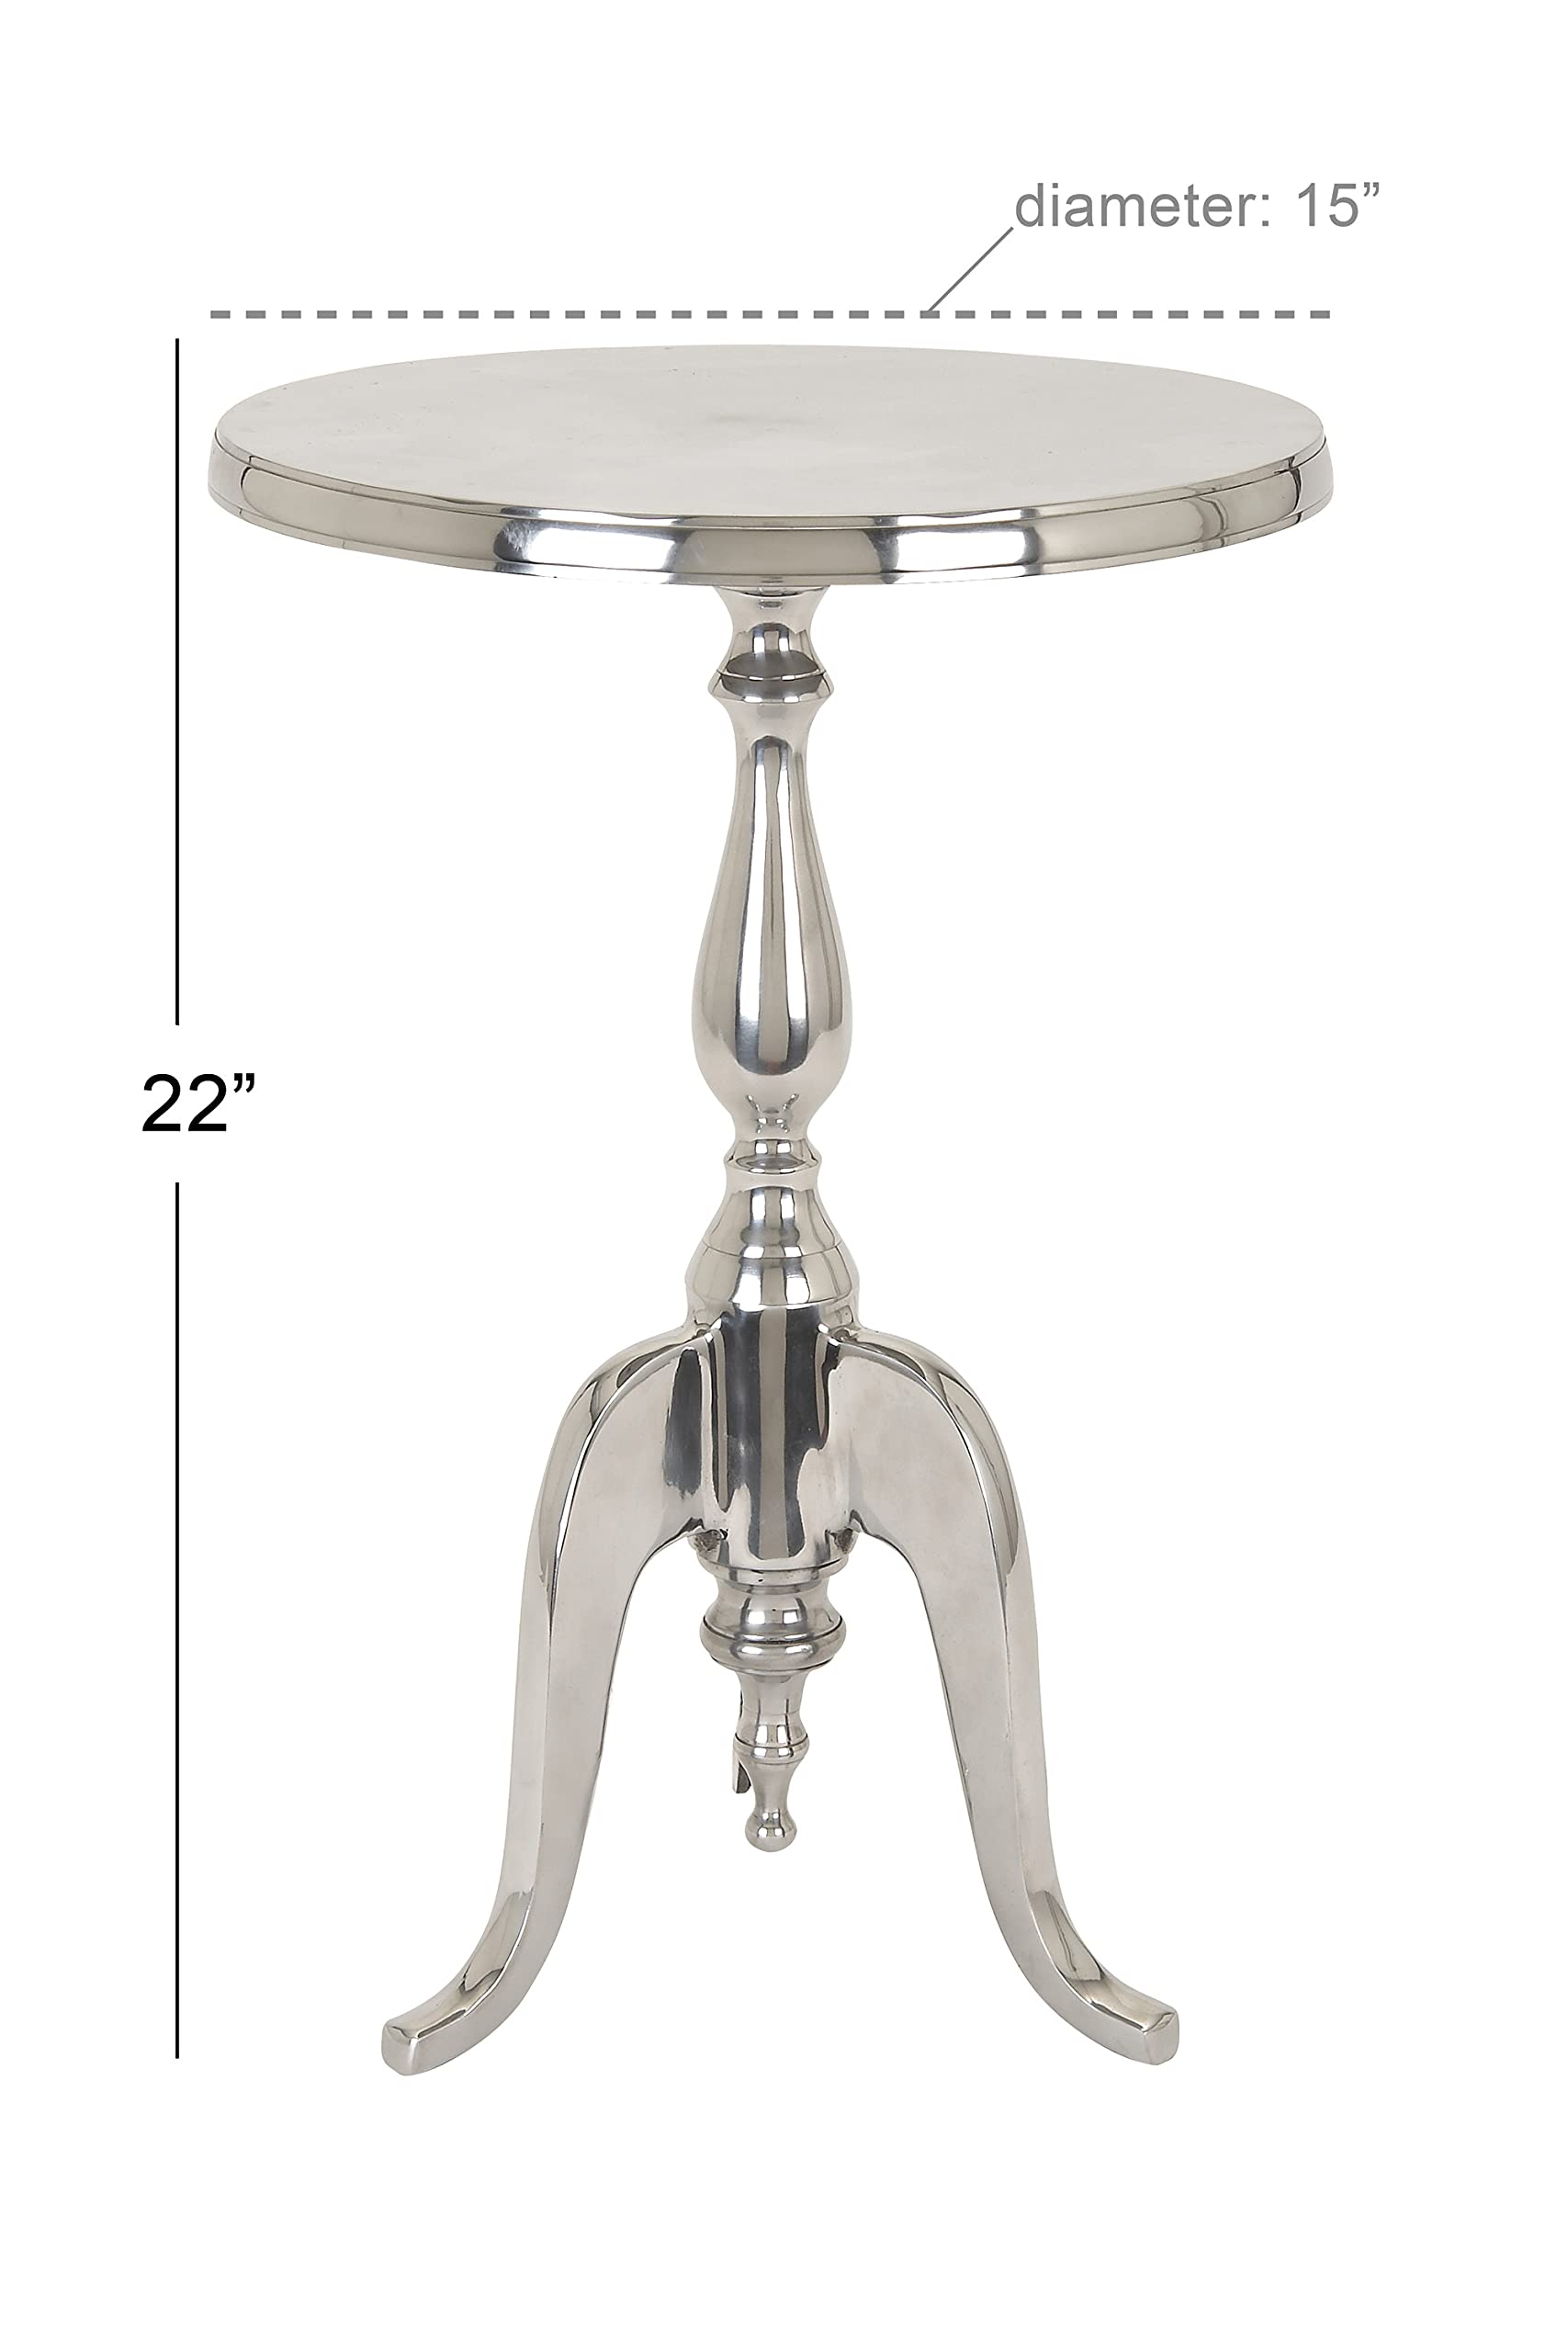 Deco 79 Traditional Aluminum Round Accent Table, 15" x 15" x 22", Silver